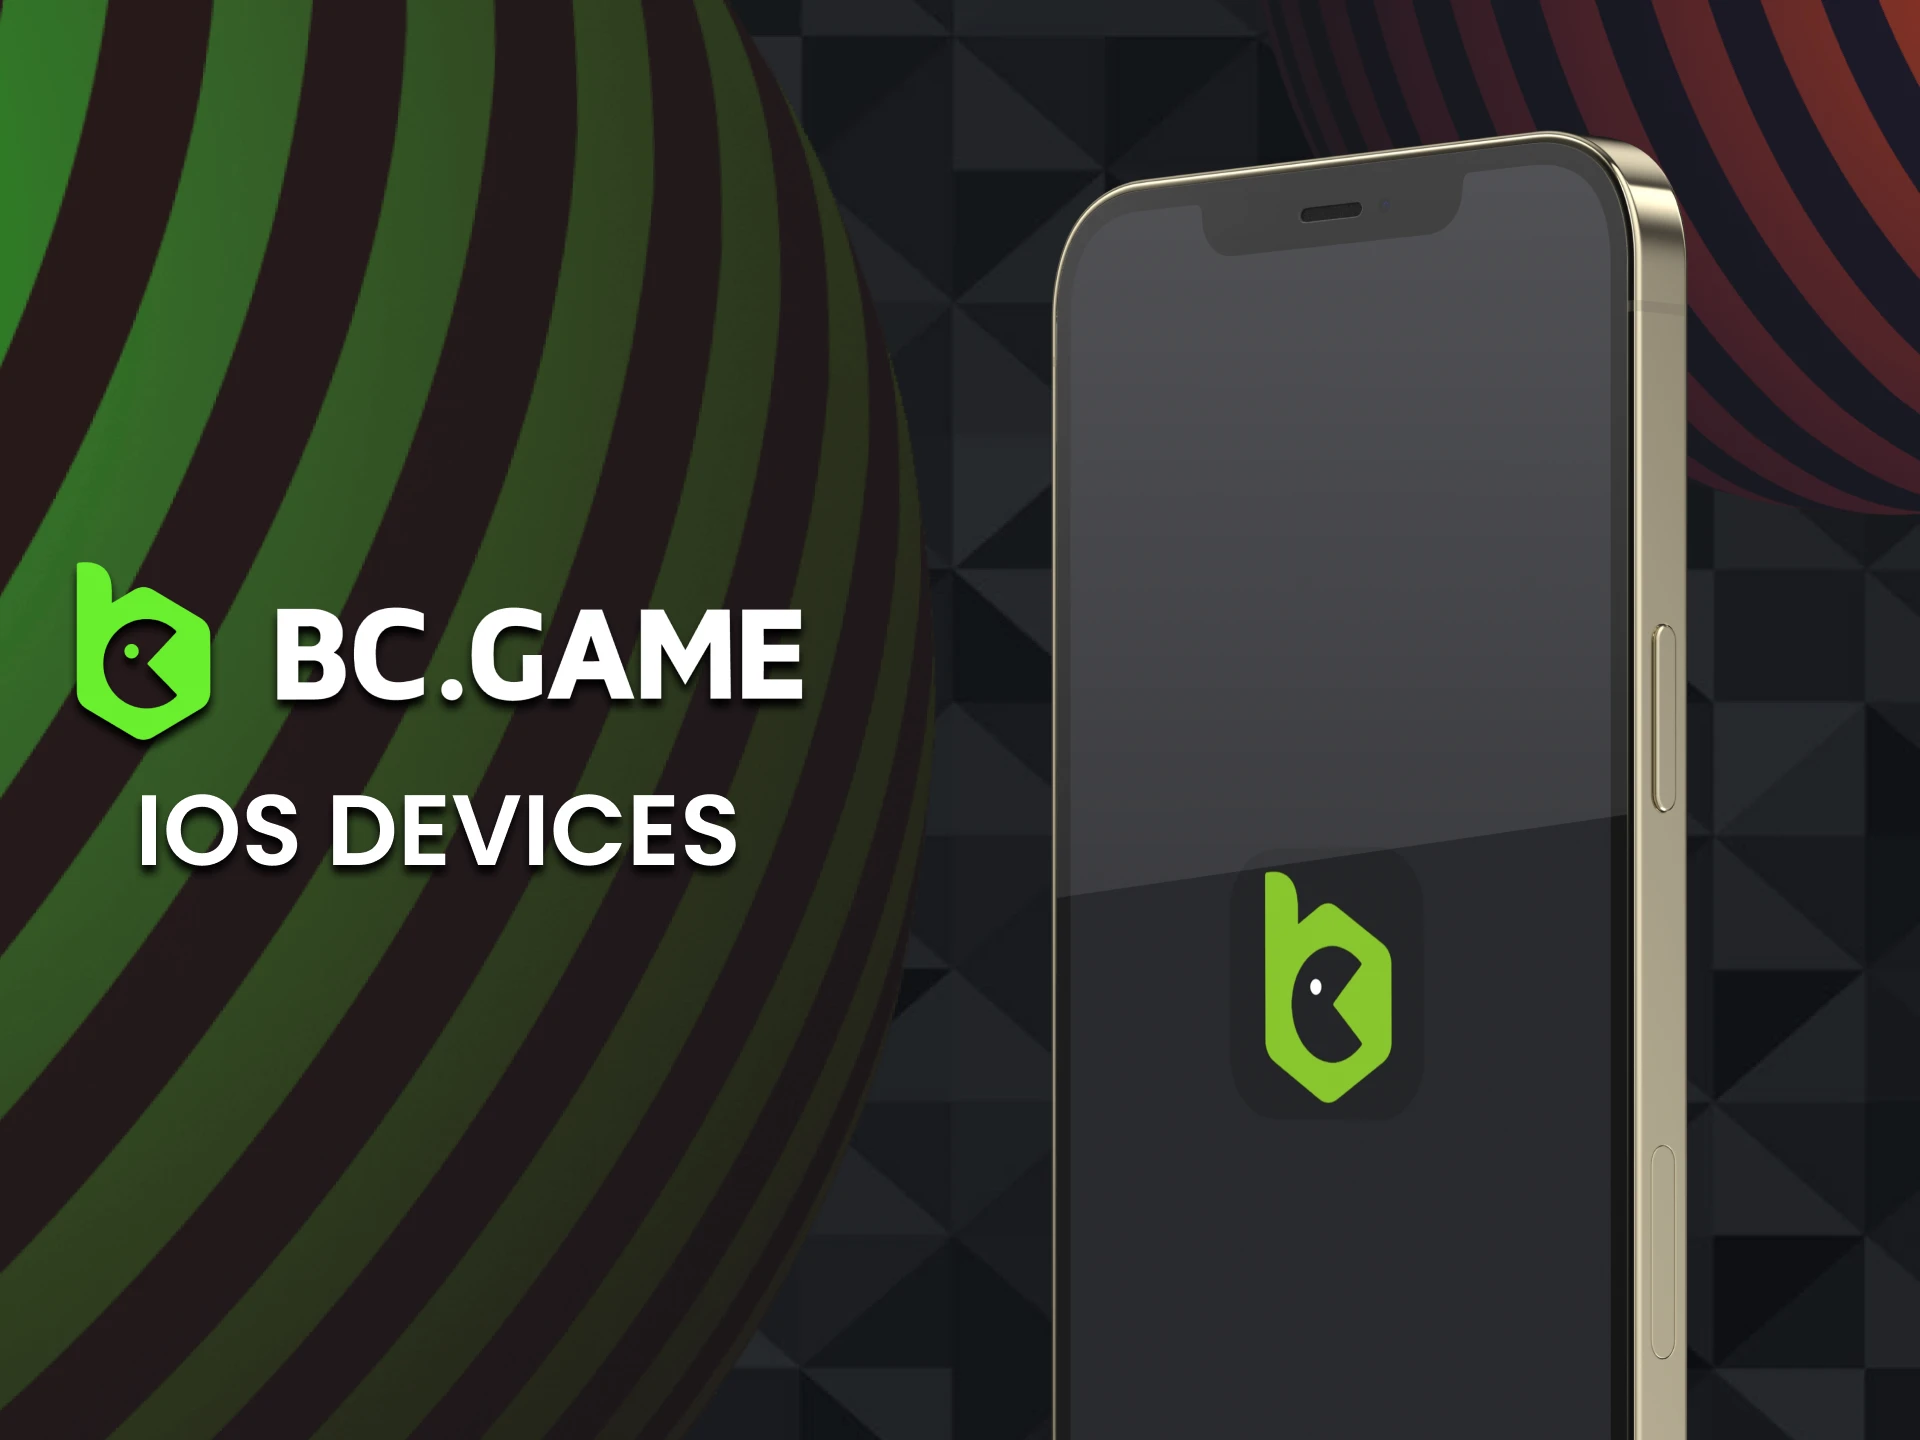 All iOS devices are supported by BC Game app.